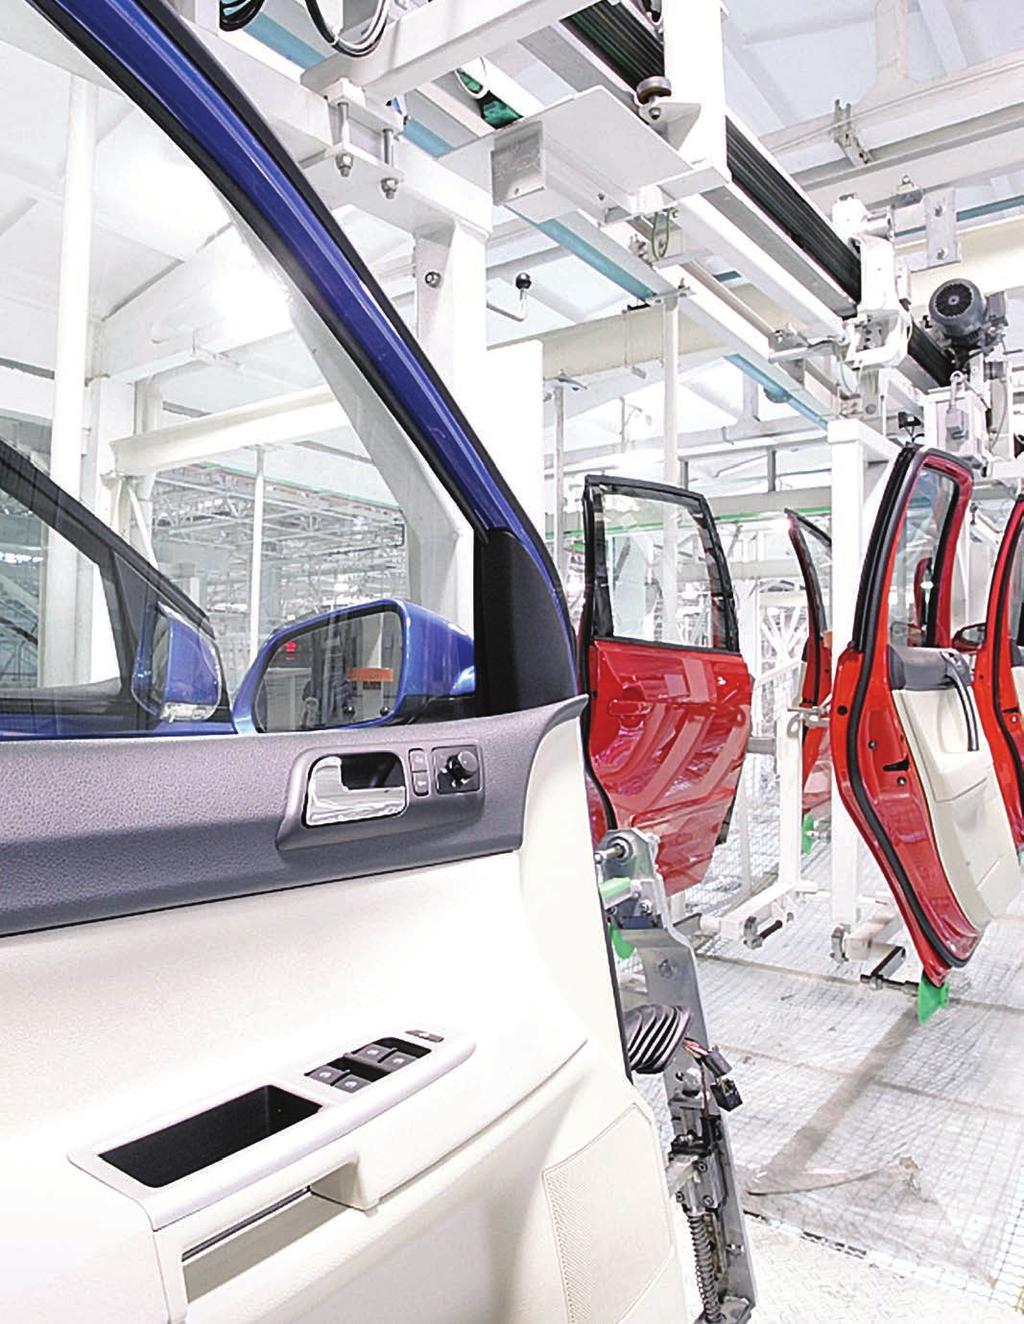 2 Faster, more efficient design can help automotive companies comply with